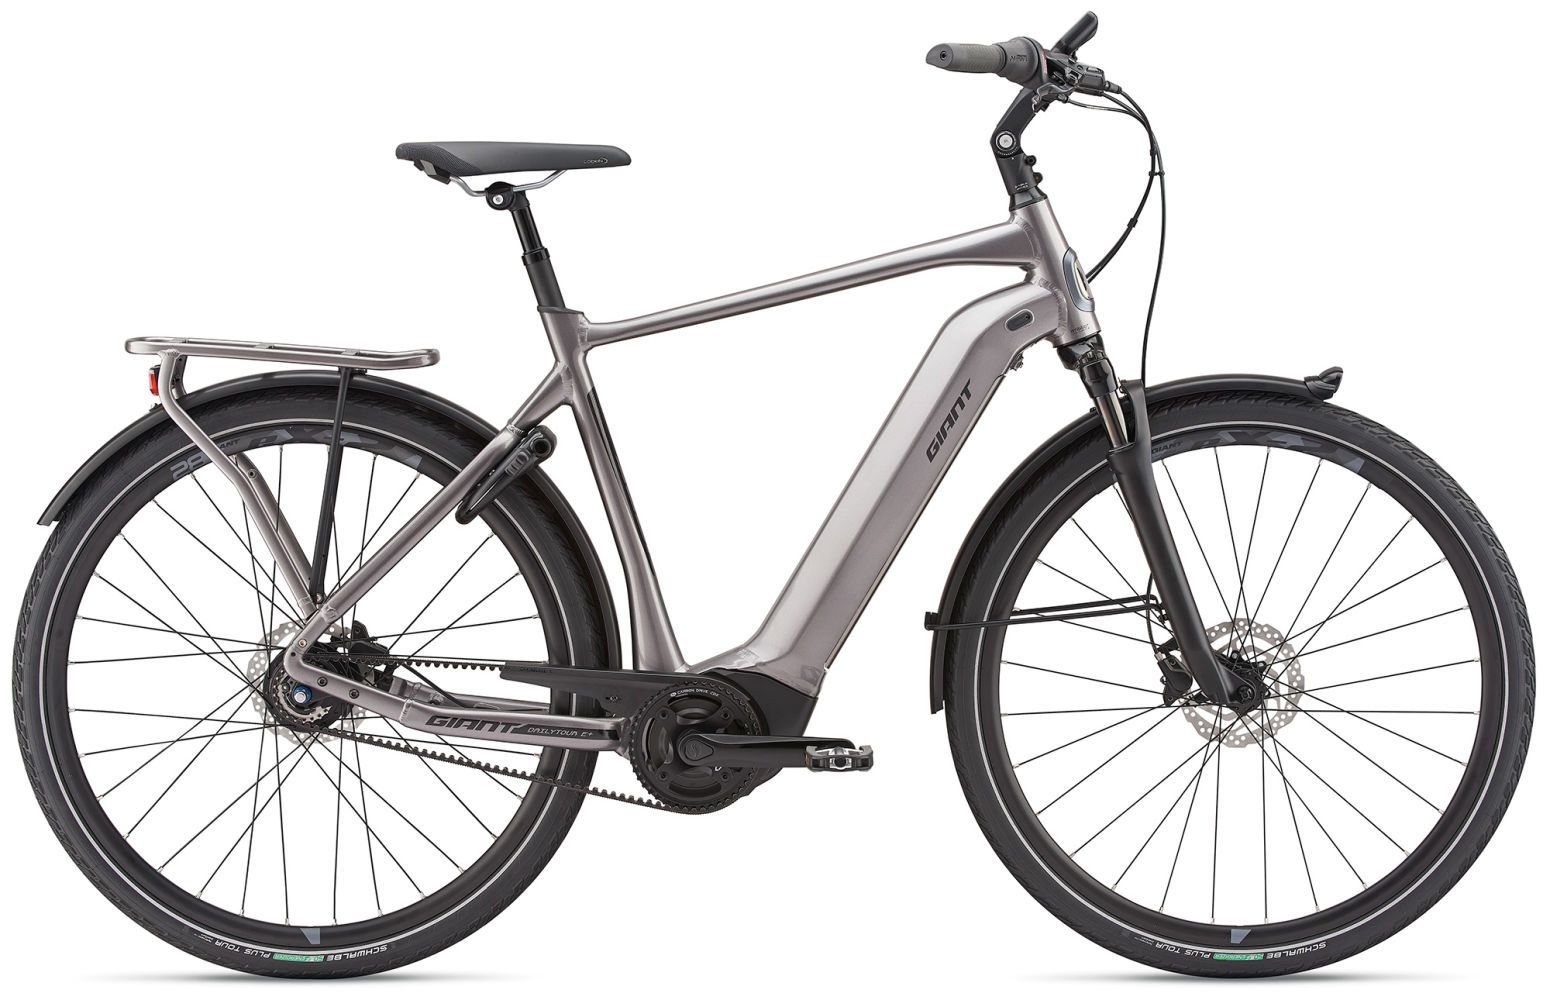 belt drive electric bicycle